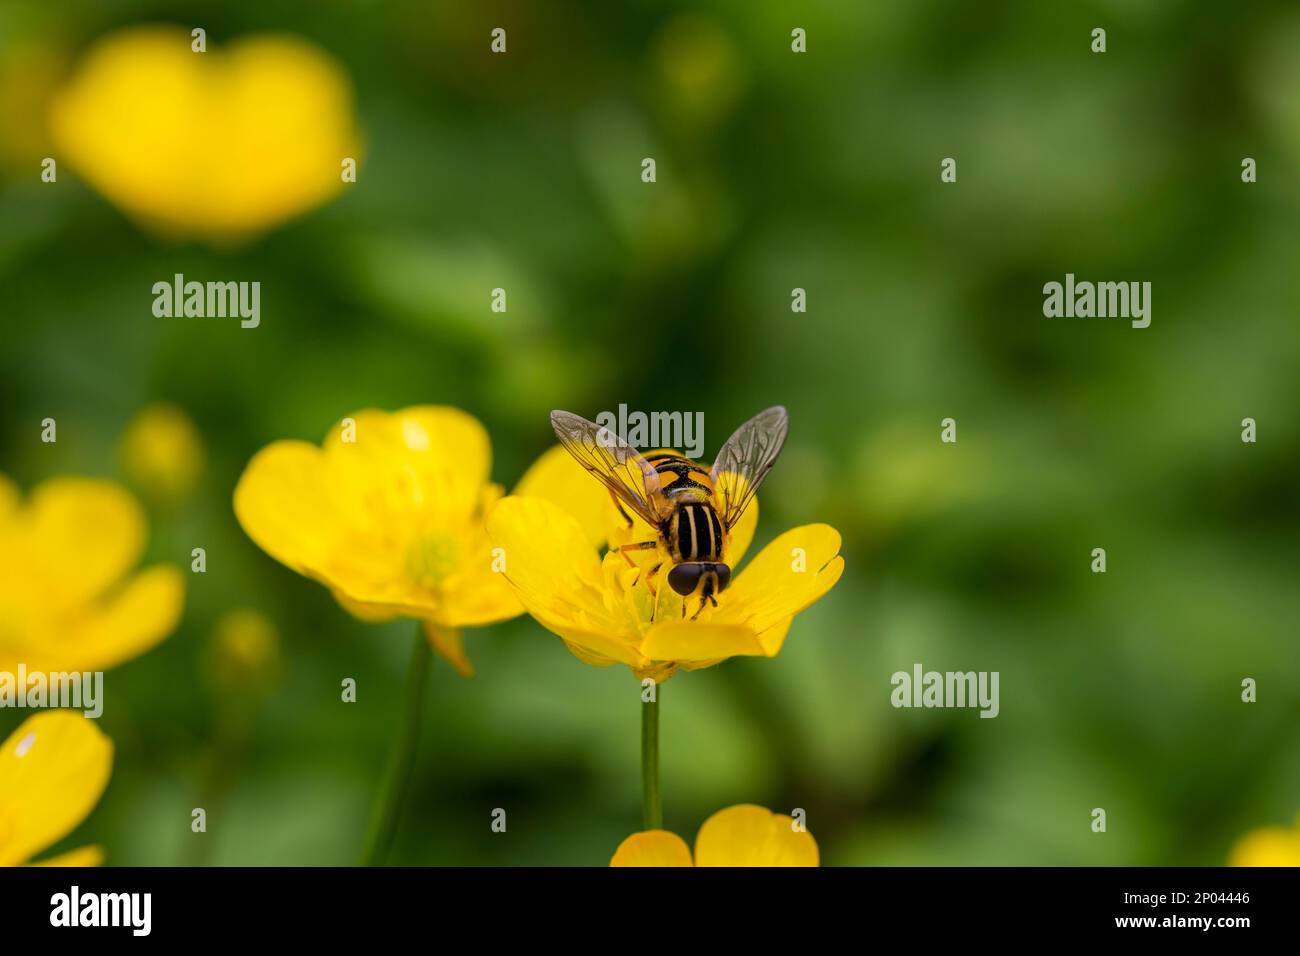 a close up of a fly on the edge of a buttercup flower Stock Photo